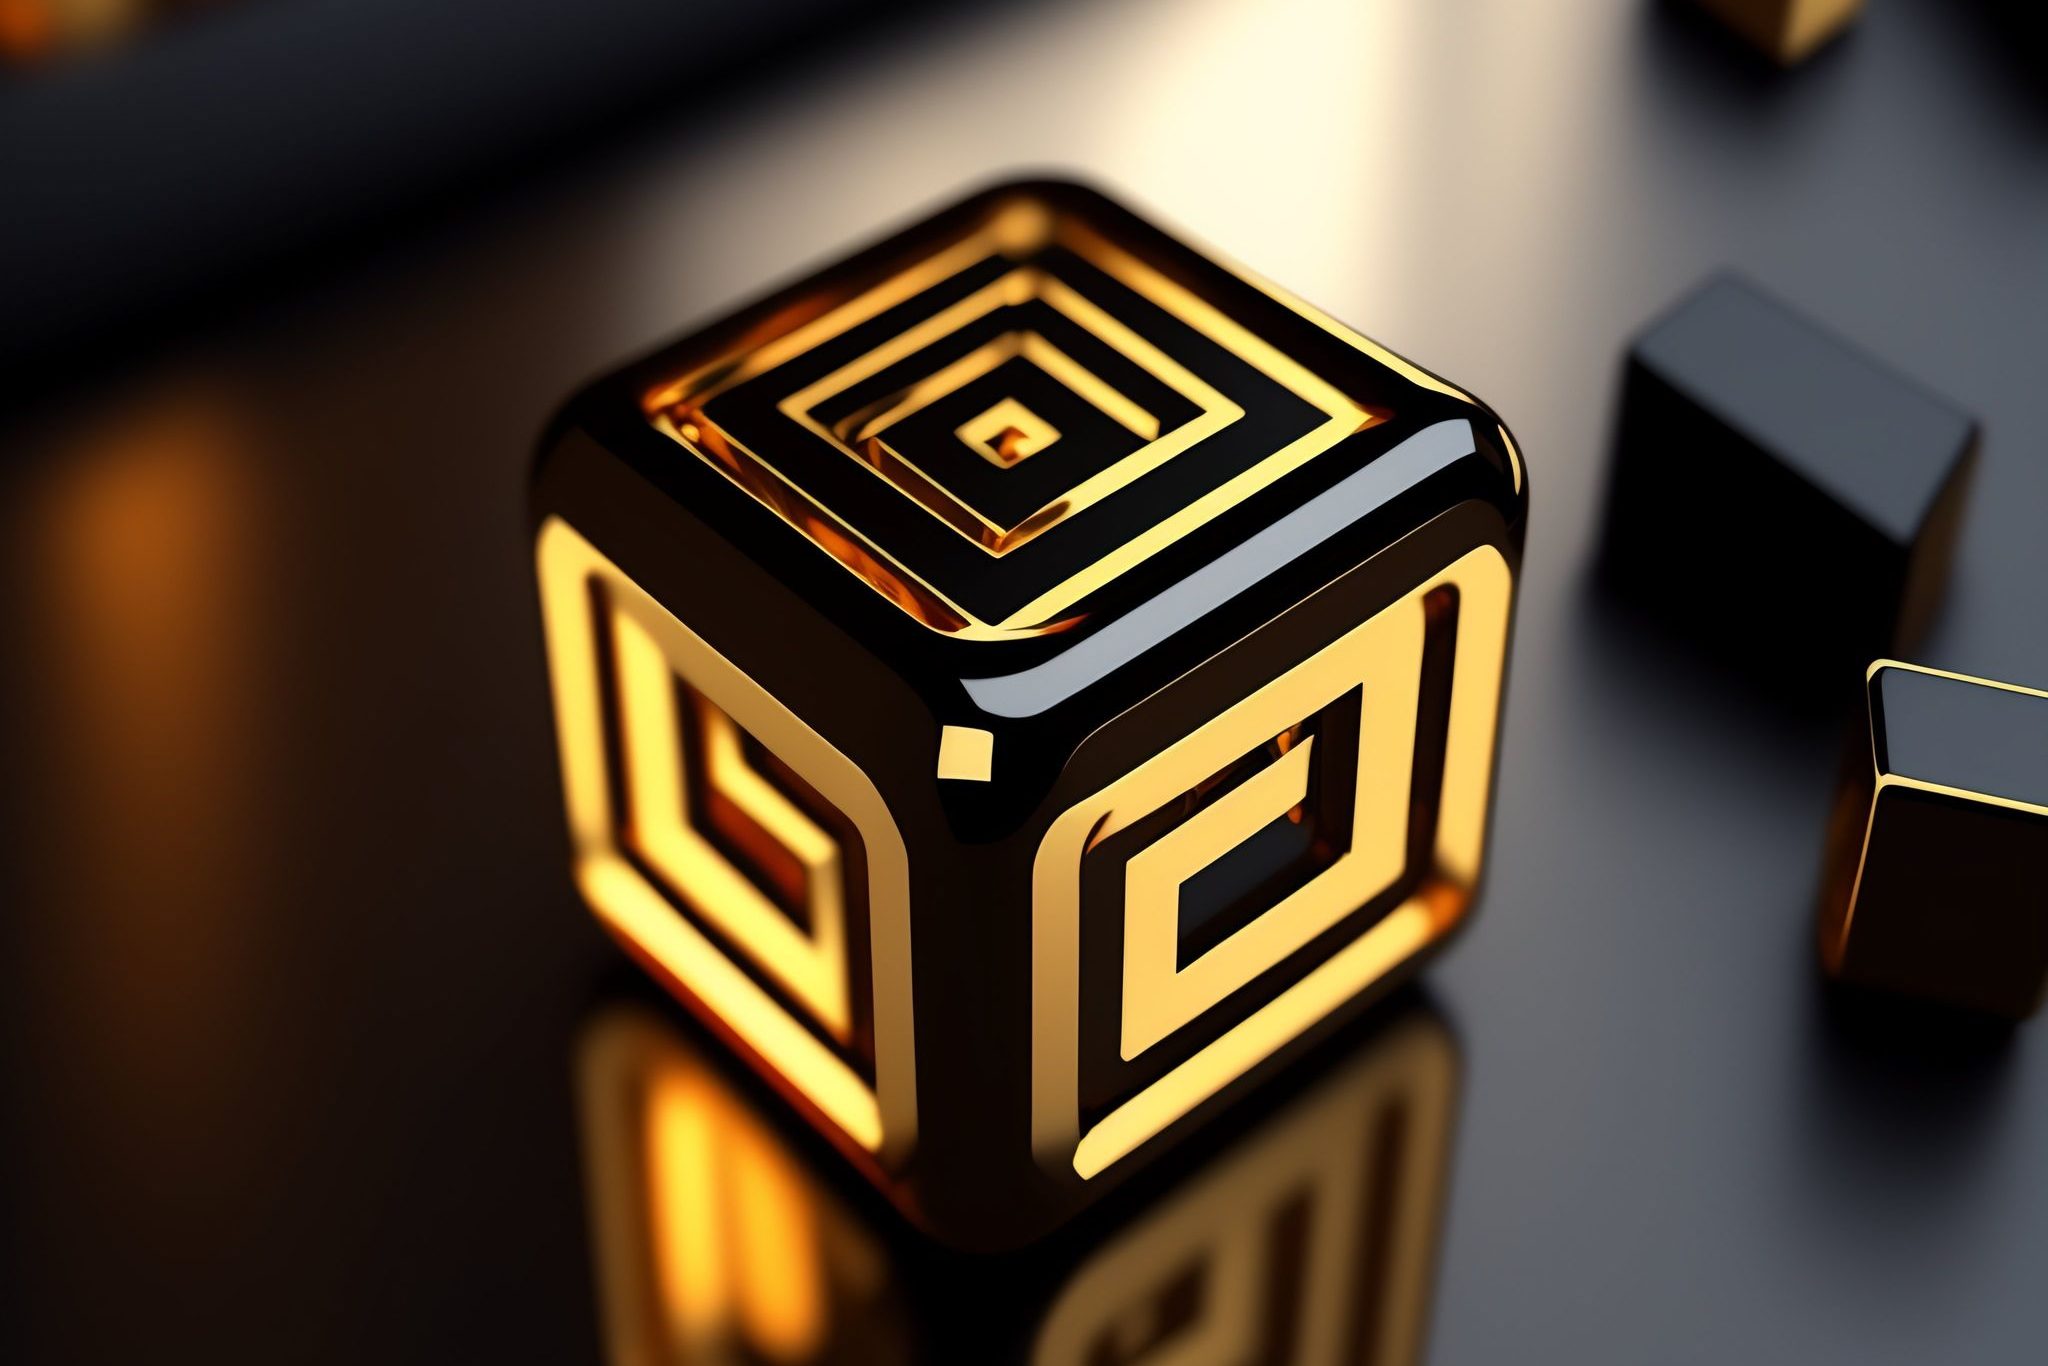 A black and gold block representing the importance of foundation models in AI systems